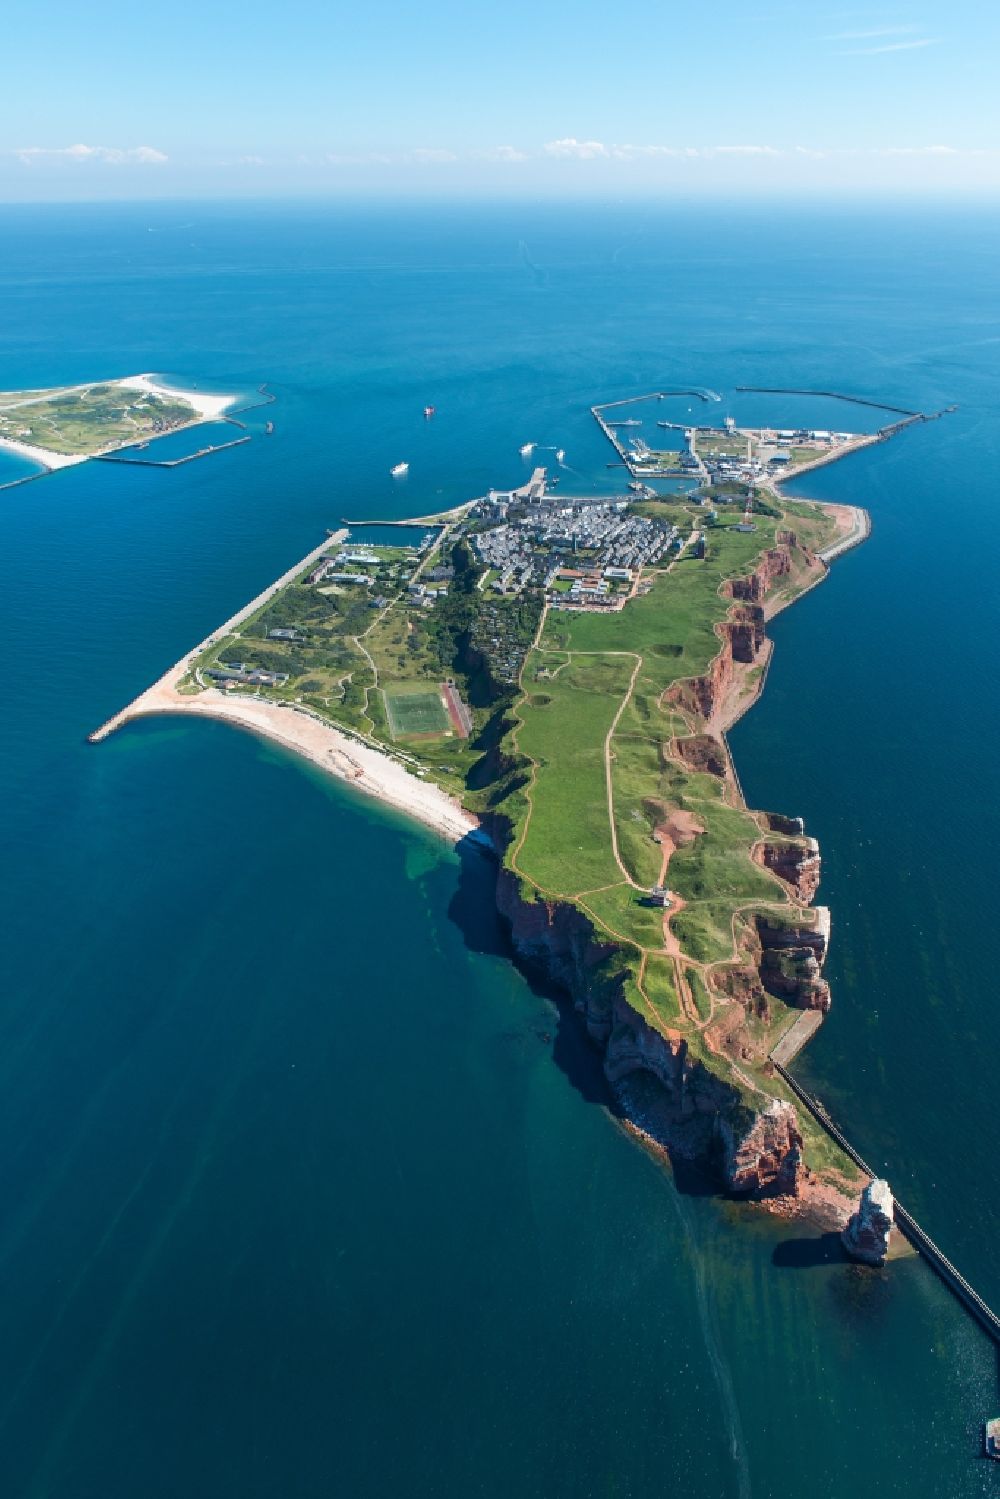 Helgoland from above - The island of Helgoland in the North Sea to the port area on Helgoland in Schleswig-Holstein